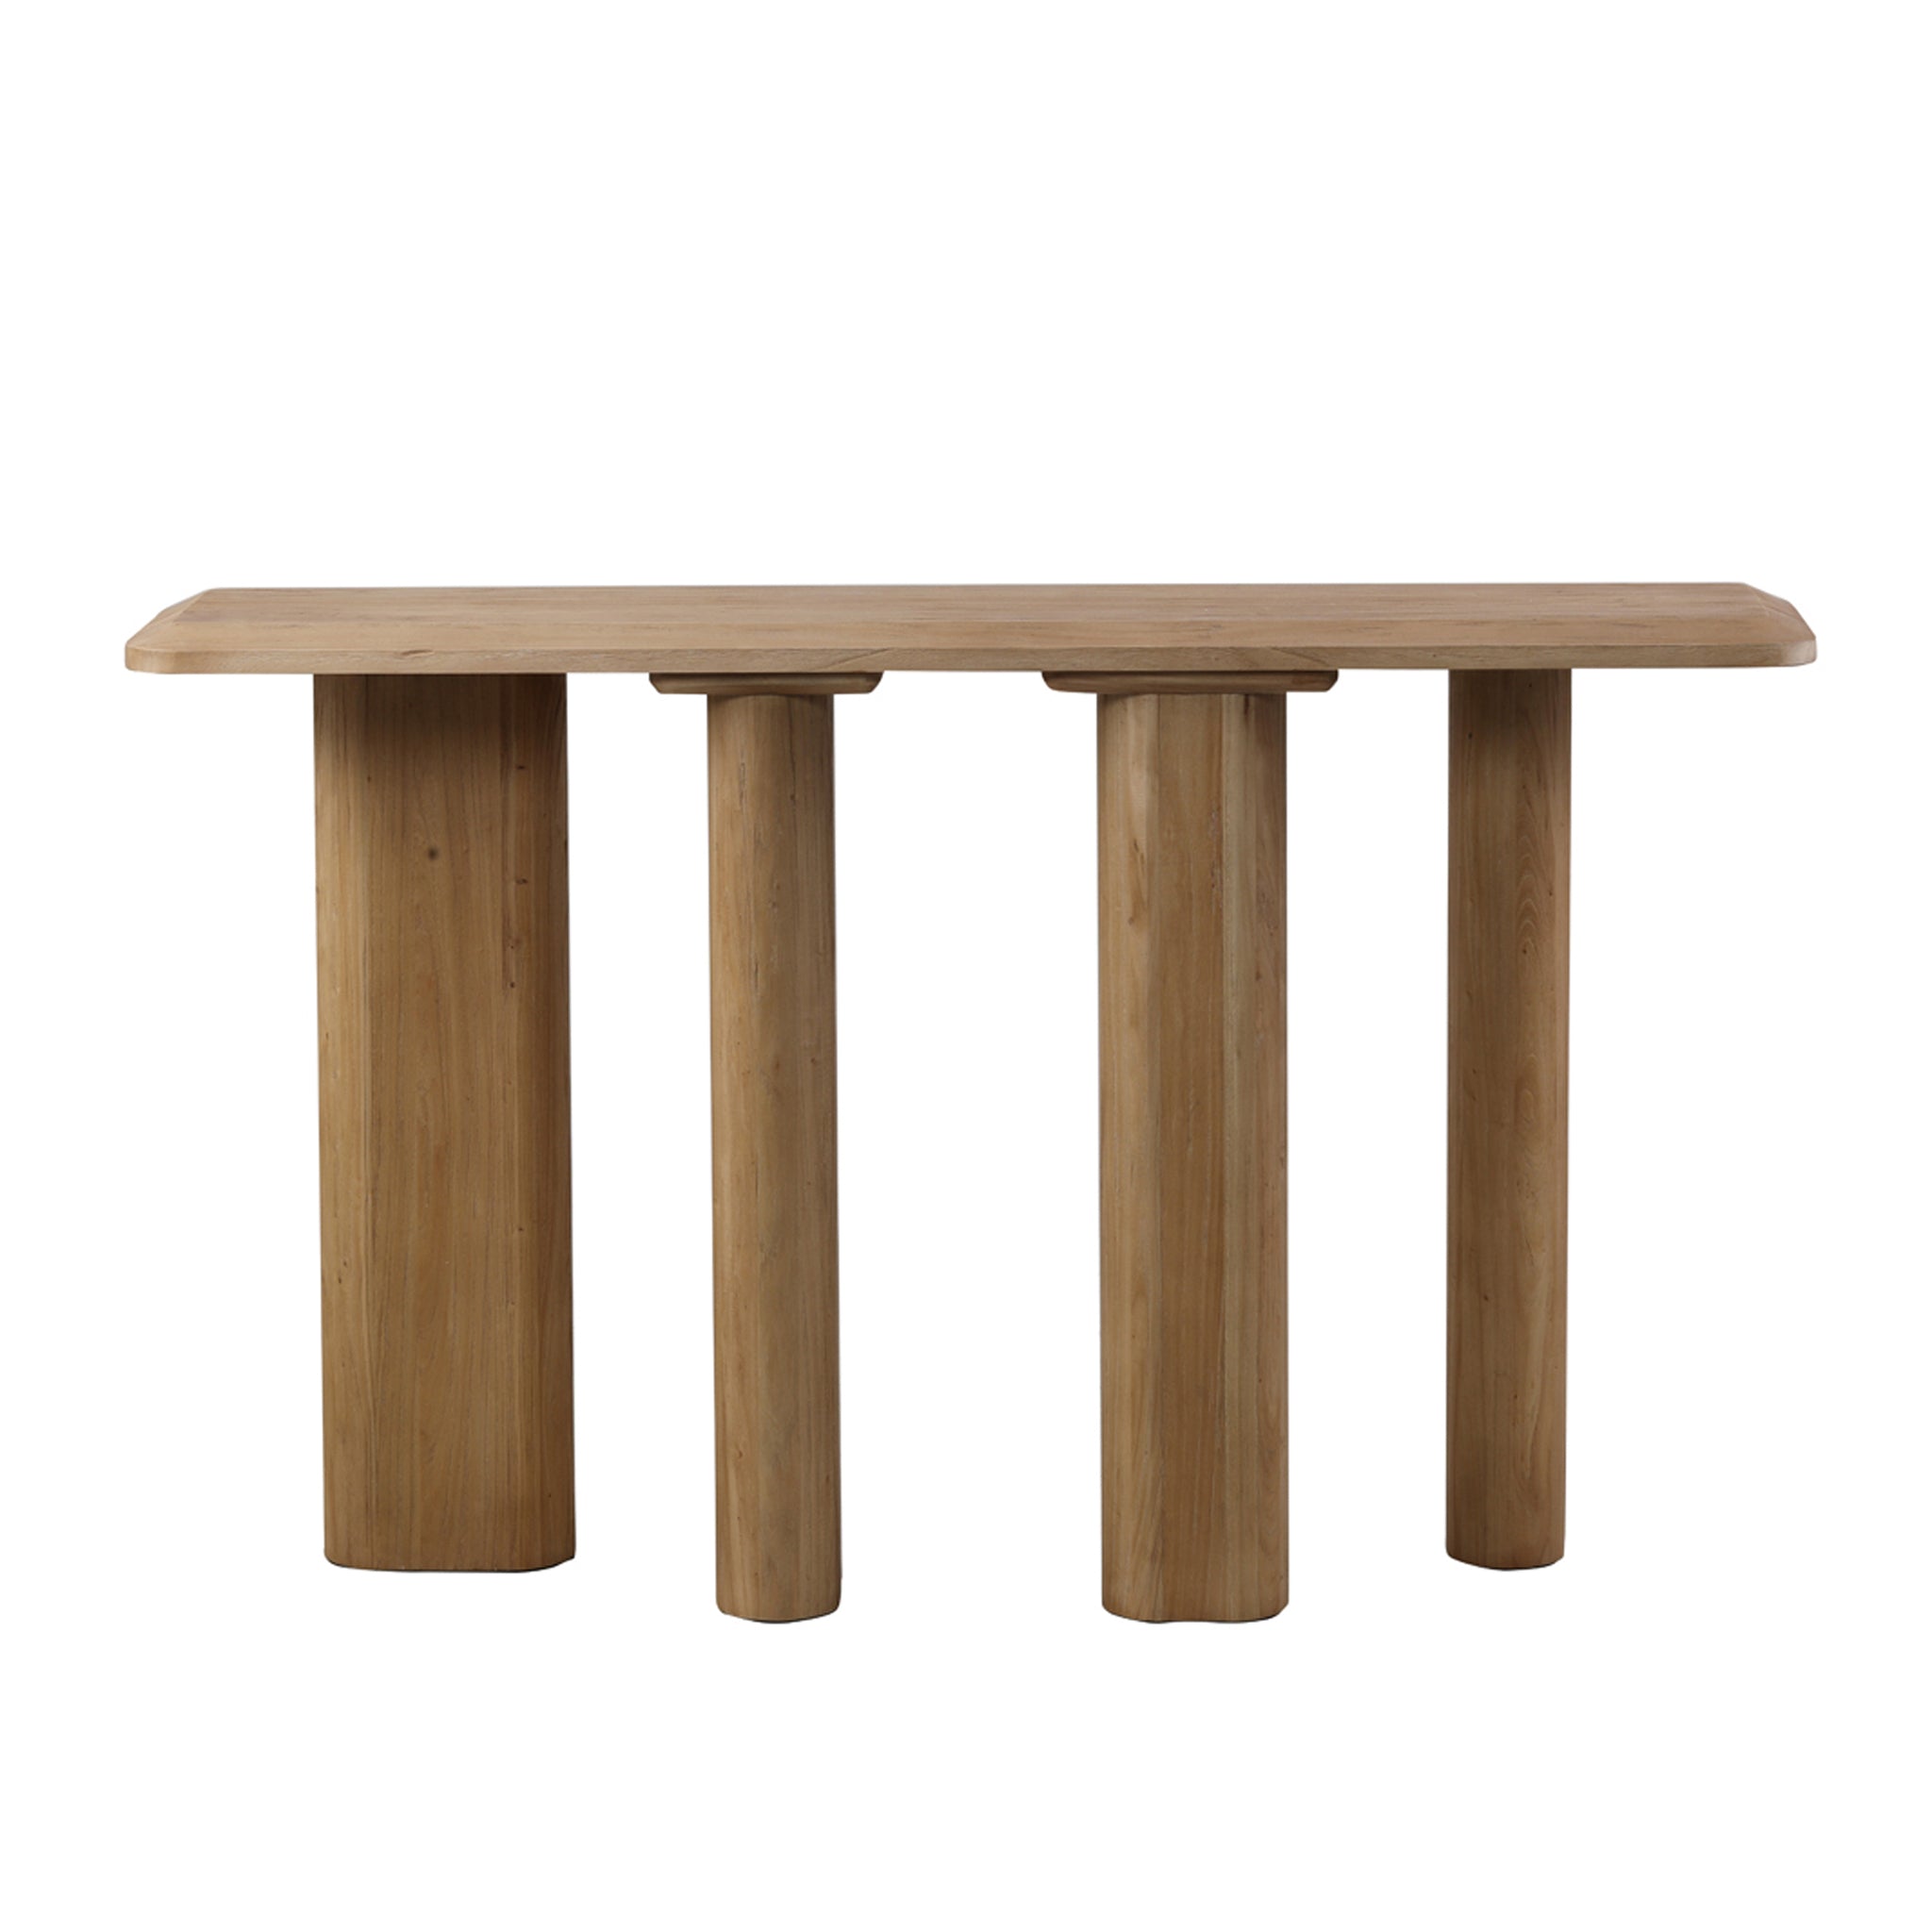 Layla 1.6m Wooden Console Table - Natural - Console